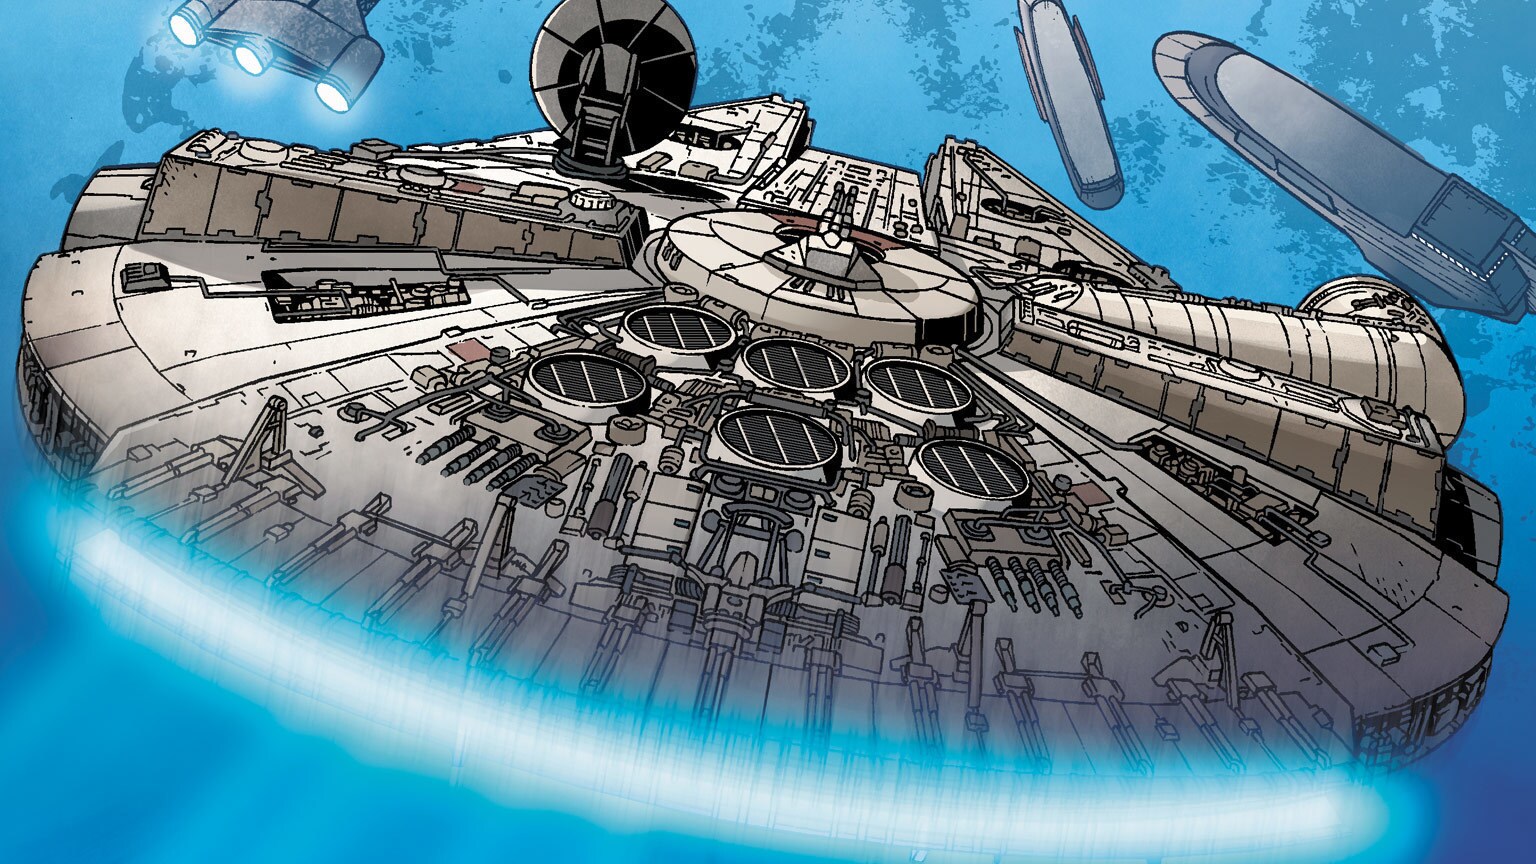 The Rebels Look to Save Han in Marvel’s Star Wars #14 - Exclusive Preview